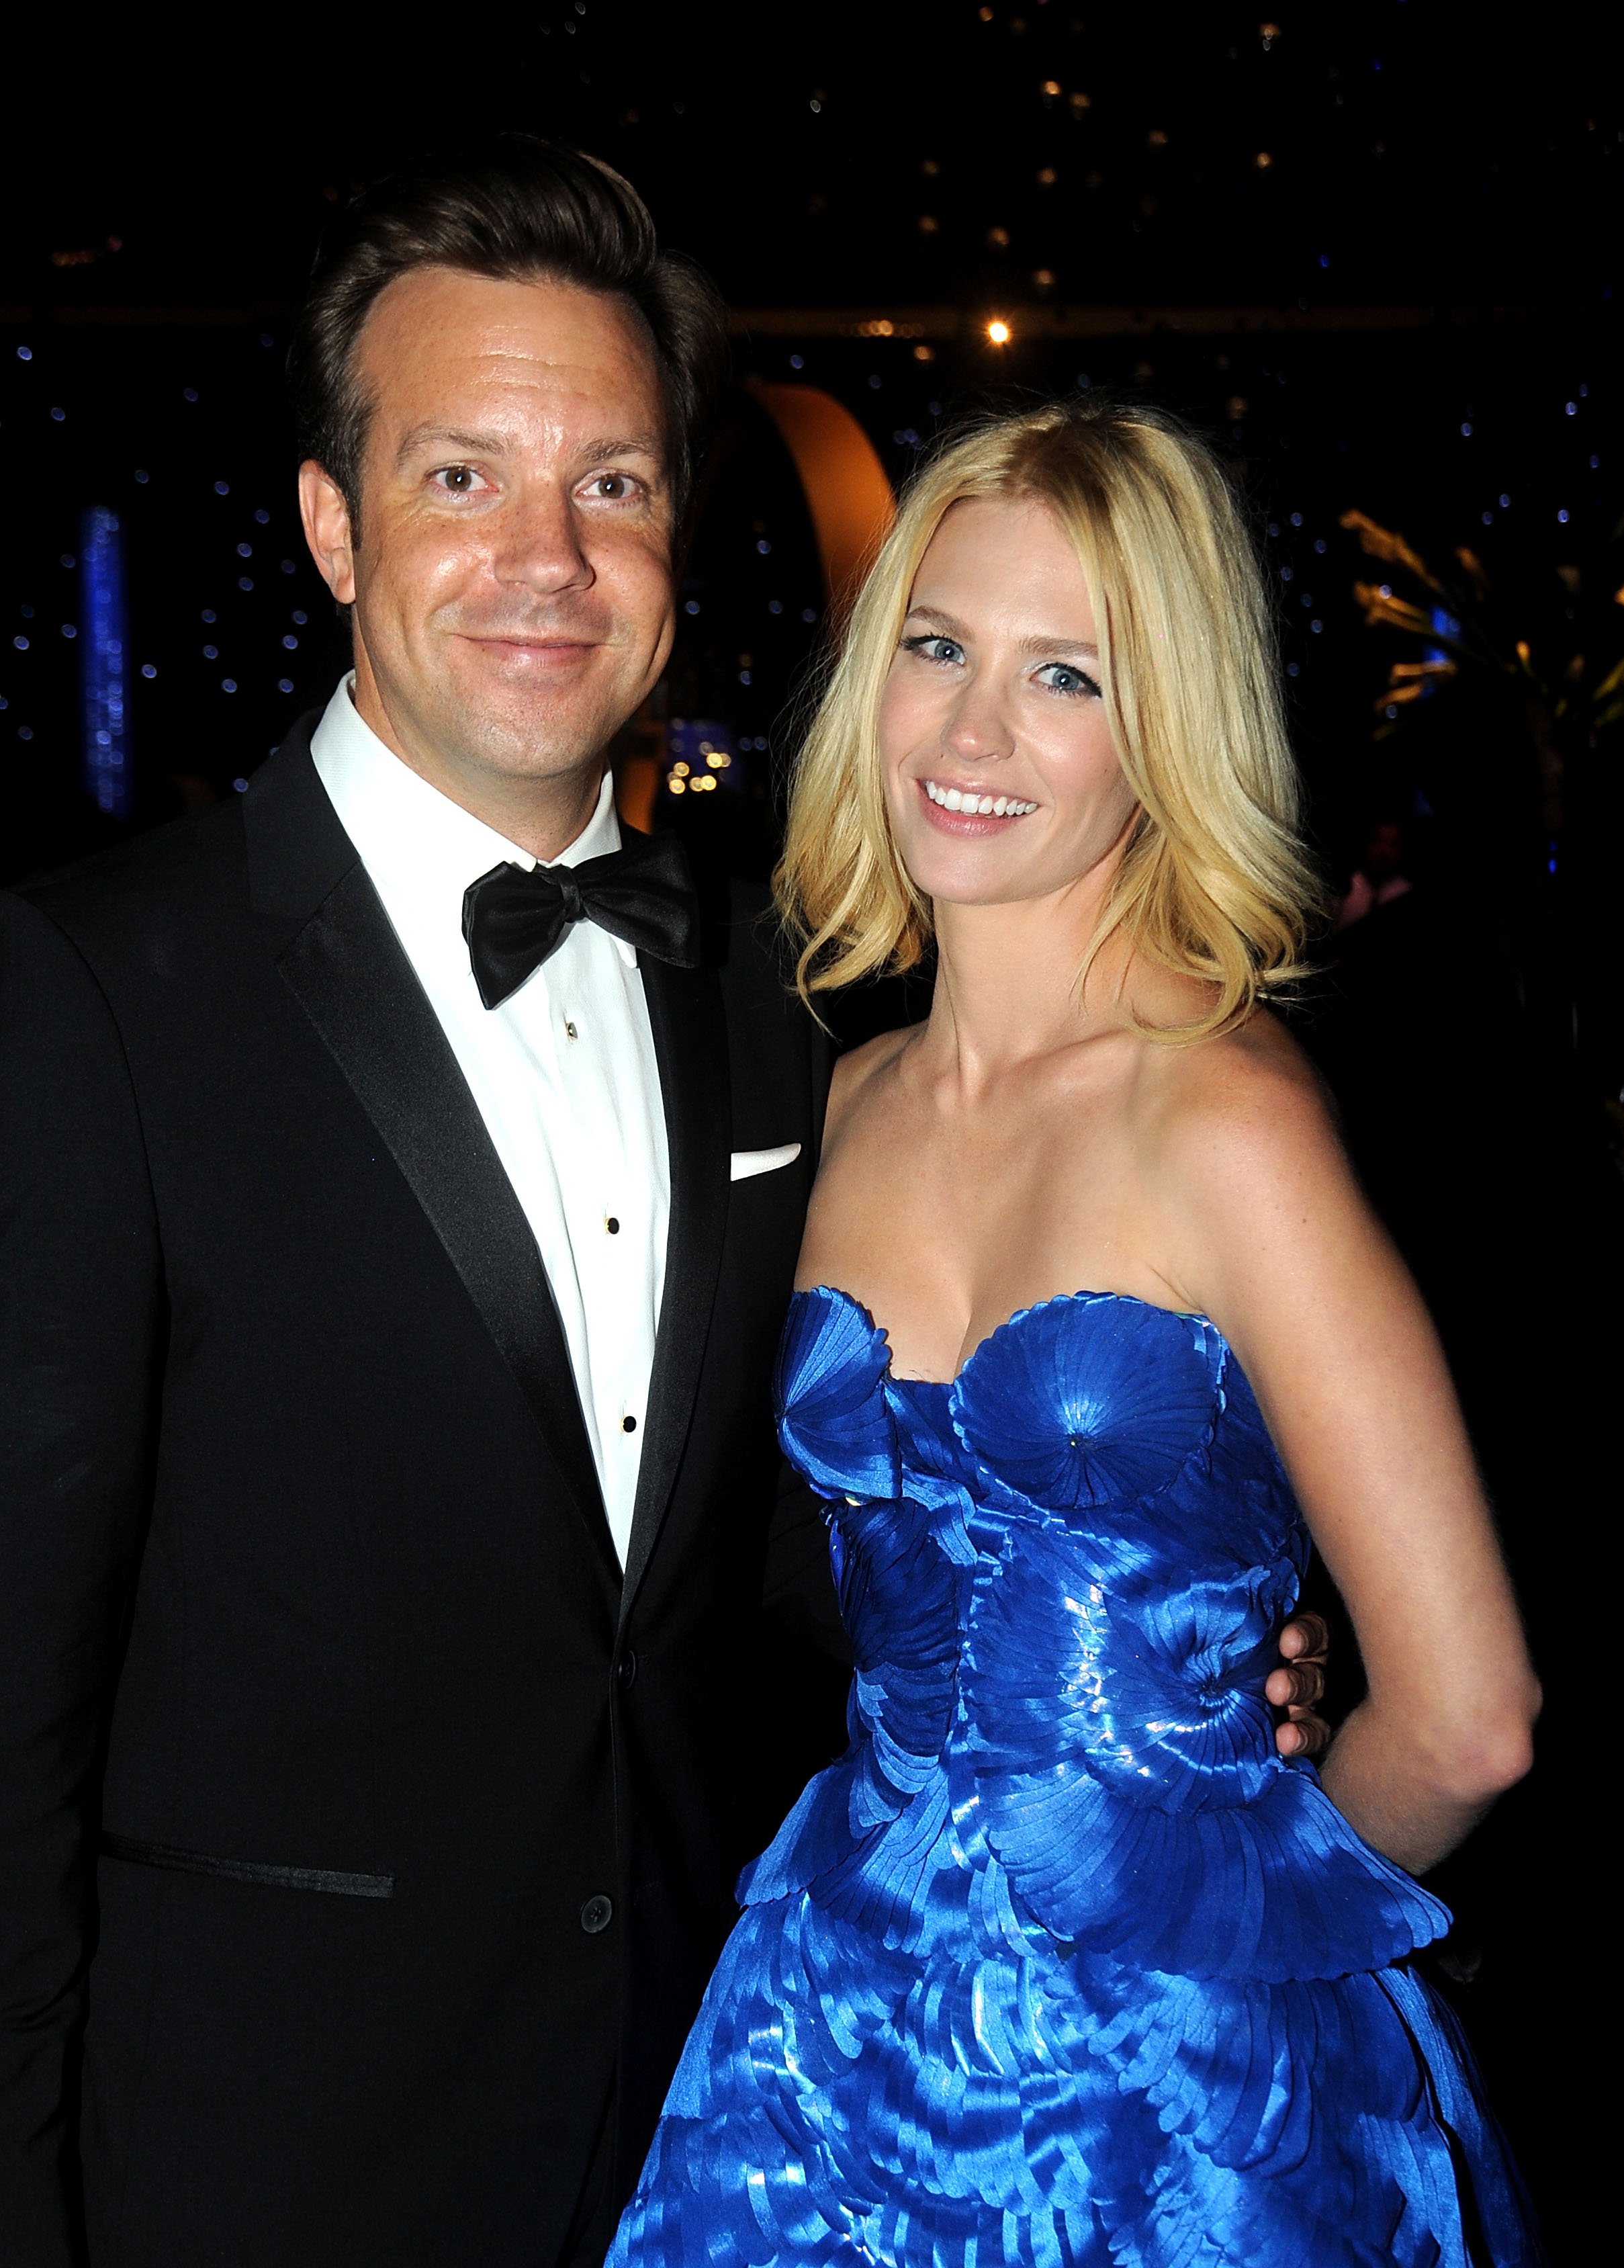 Jason Sudeikis and January Jones at the 62nd Annual Primetime Emmy Awards Governors Ball on August 29, 2010 in California | Source: Getty Images